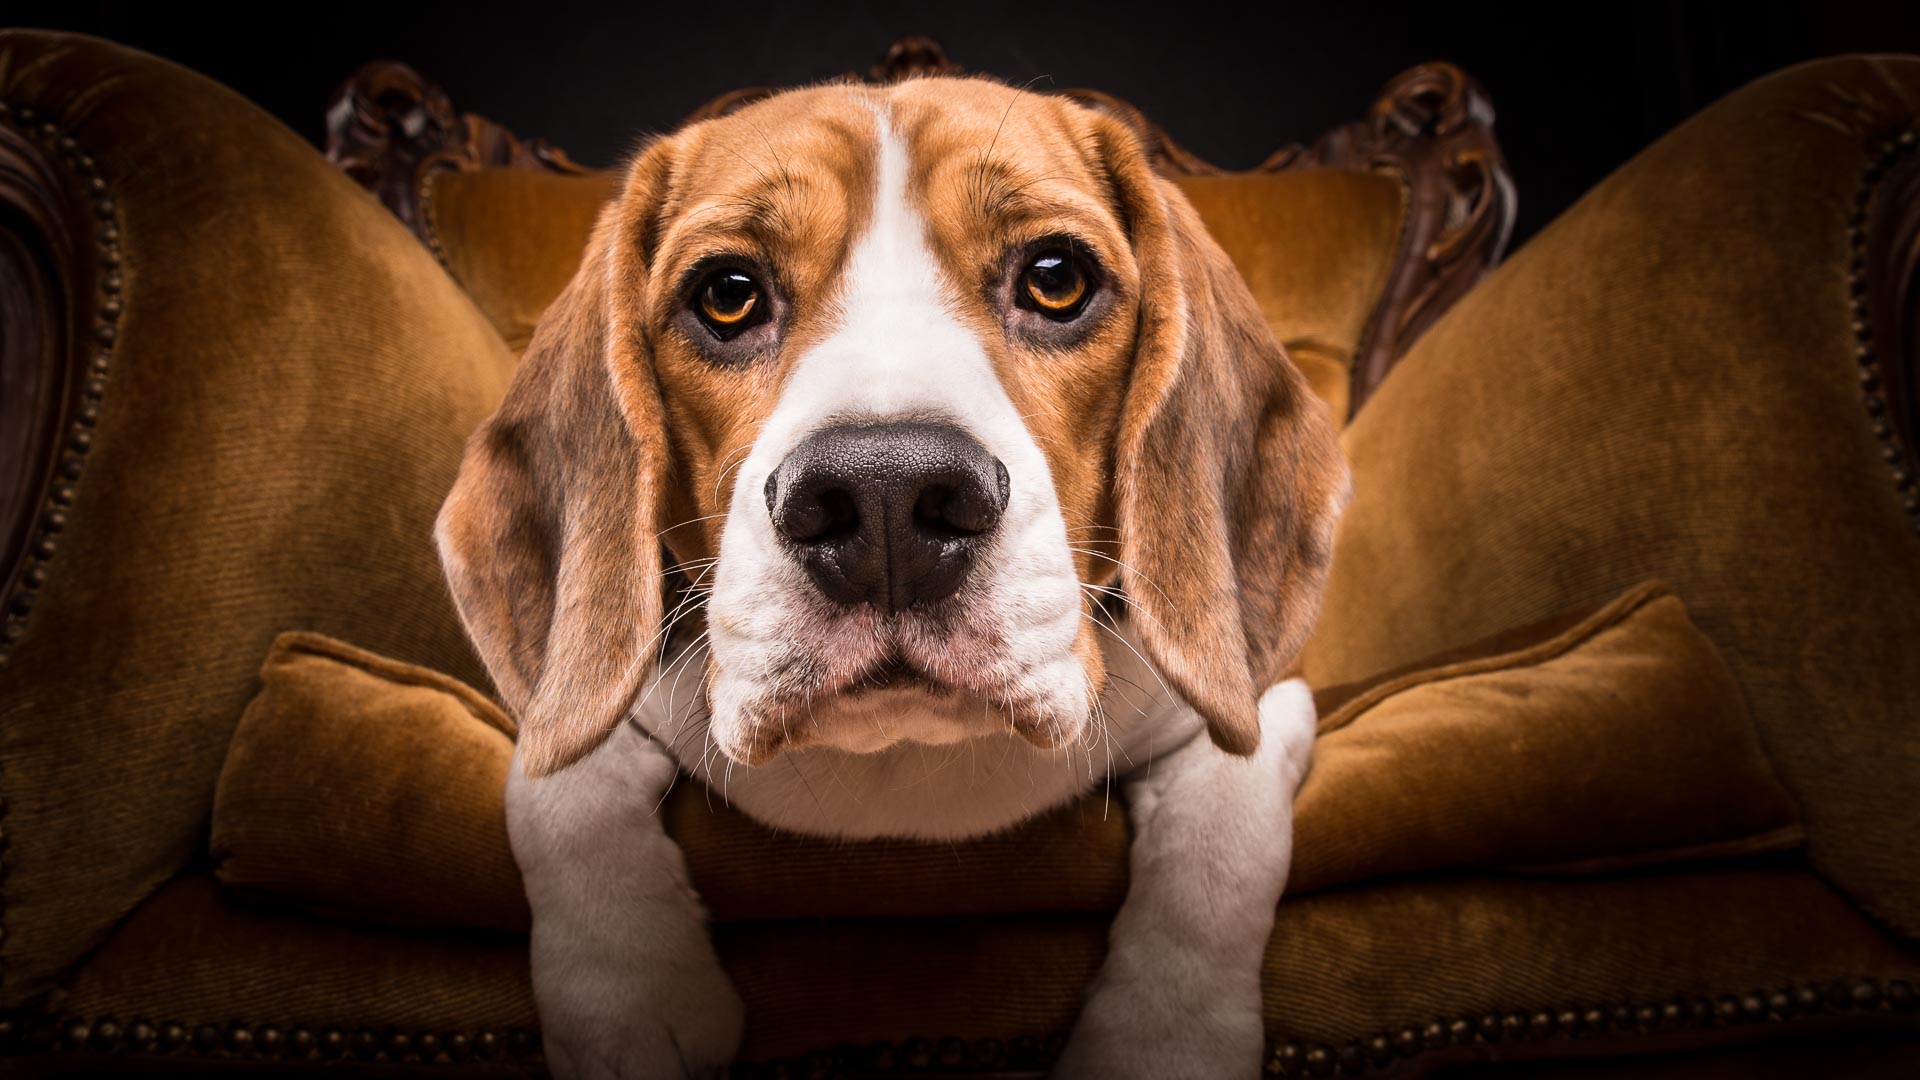 Learn pet photography